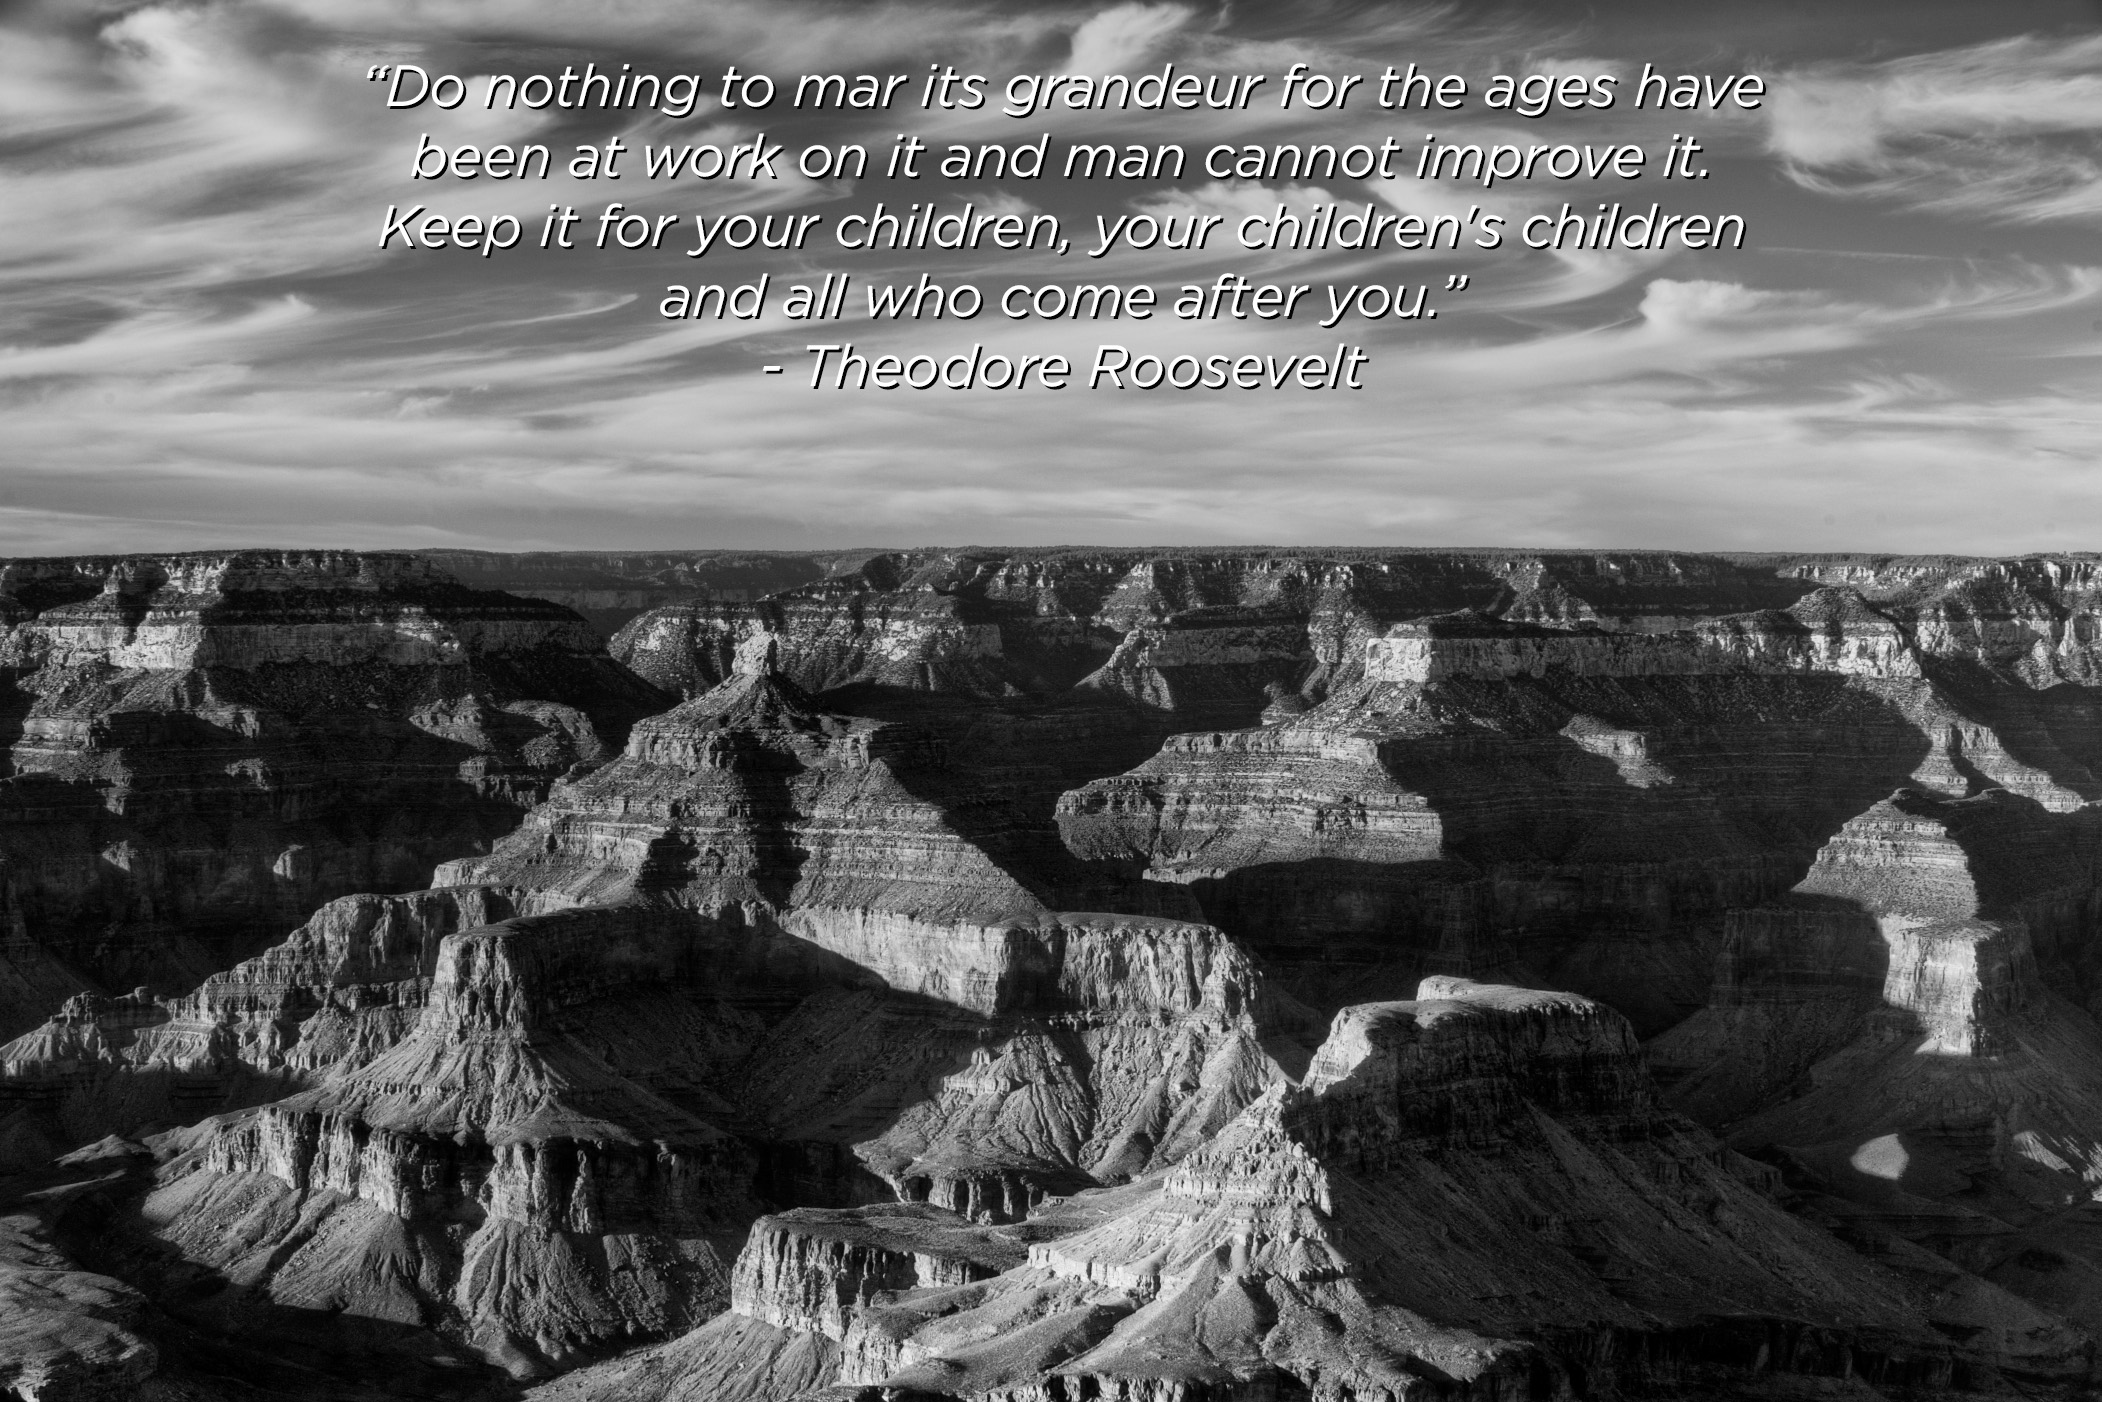 Canyon Quote 20 Grand Canyon Quotes To Encapsulate Your Bucket List